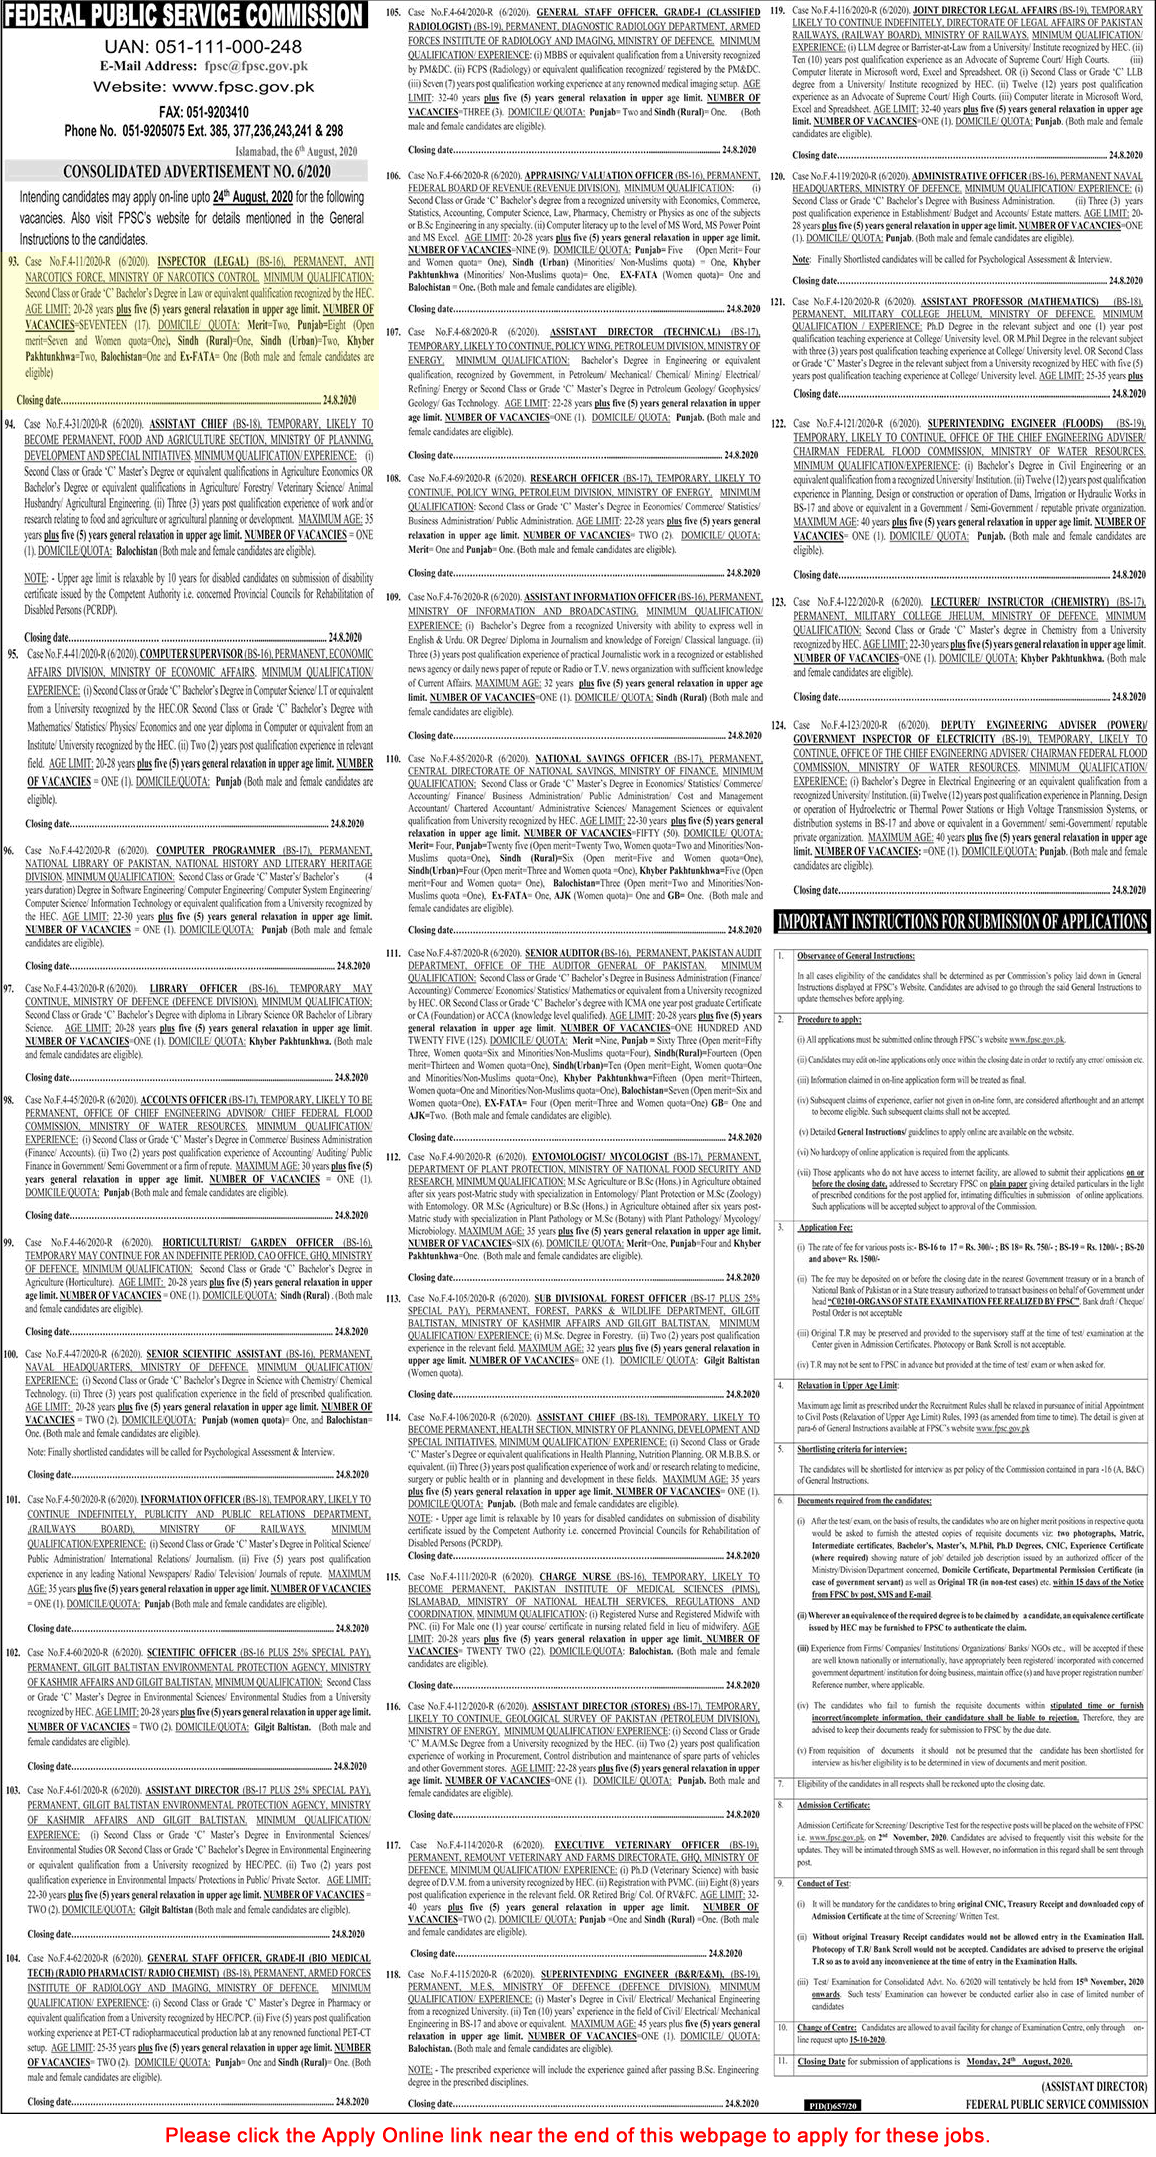 Legal Inspector Jobs in Ministry of Narcotics Control August 2020 FPSC Apply Online Latest